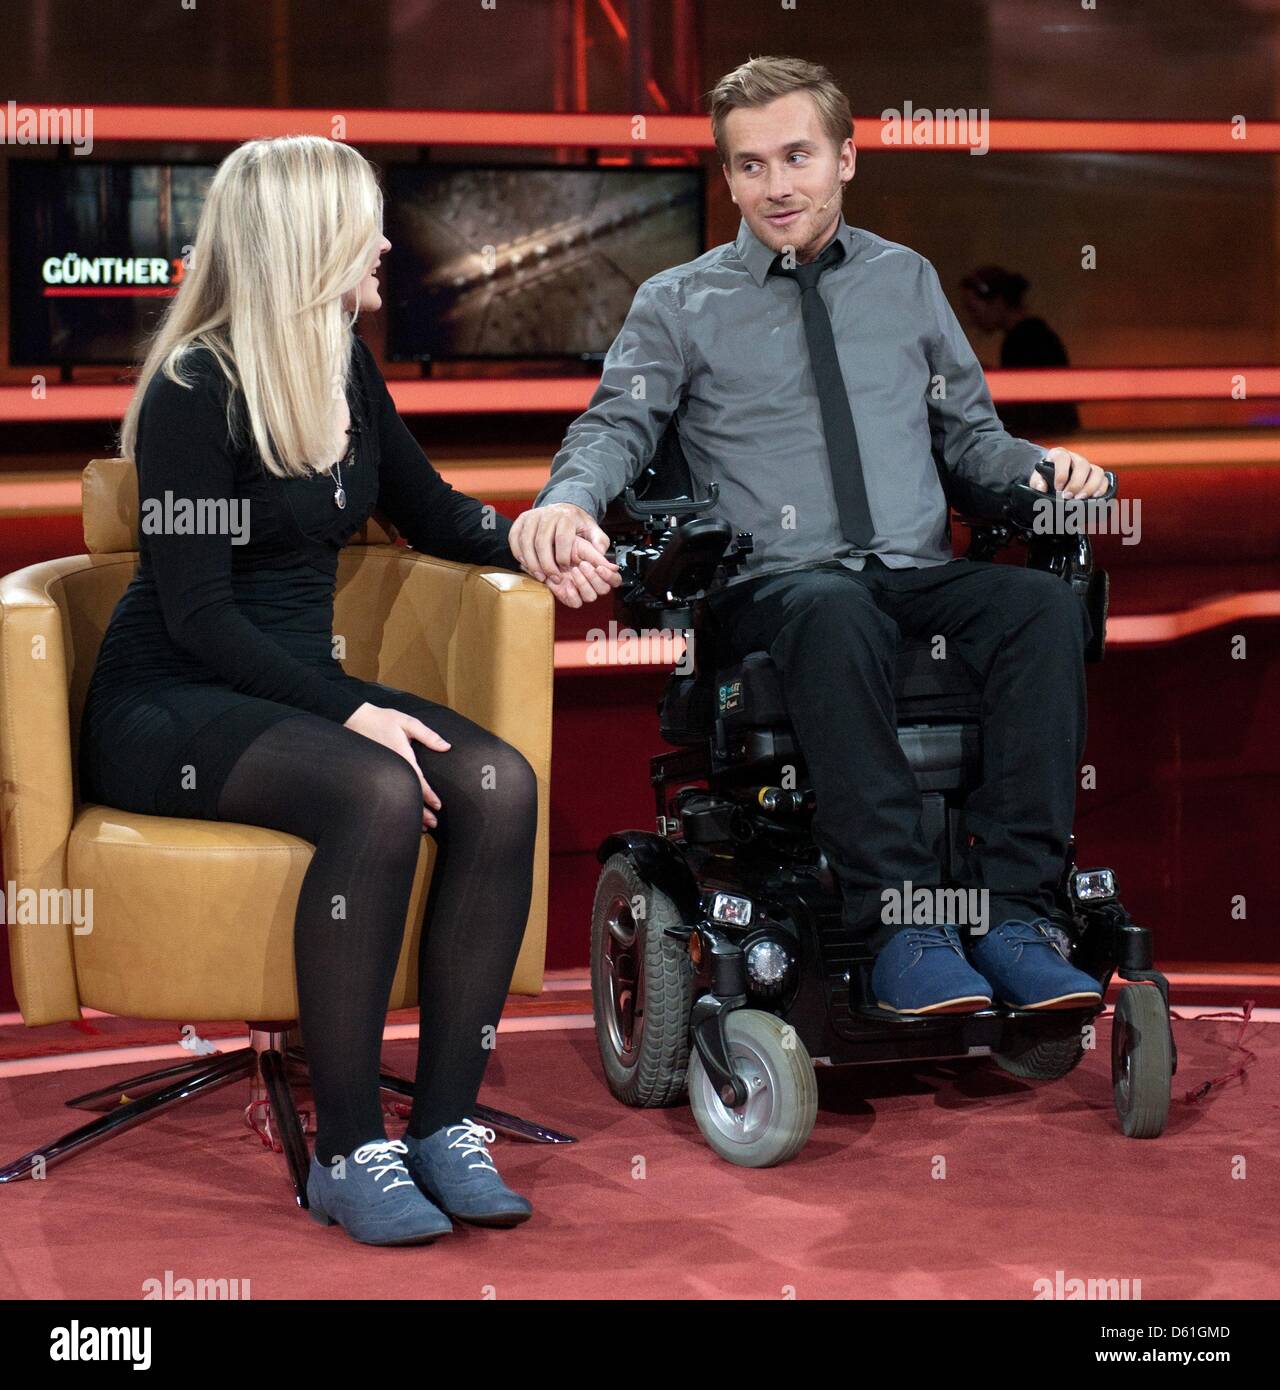 Samuel Koch and his sister Rebecca are guests in the German TV talk show  'Guenther Jauch' by public broadcaster ARD titled 'Strokes of fate - Samuel  Koch's second life' in Berlin, Germany,